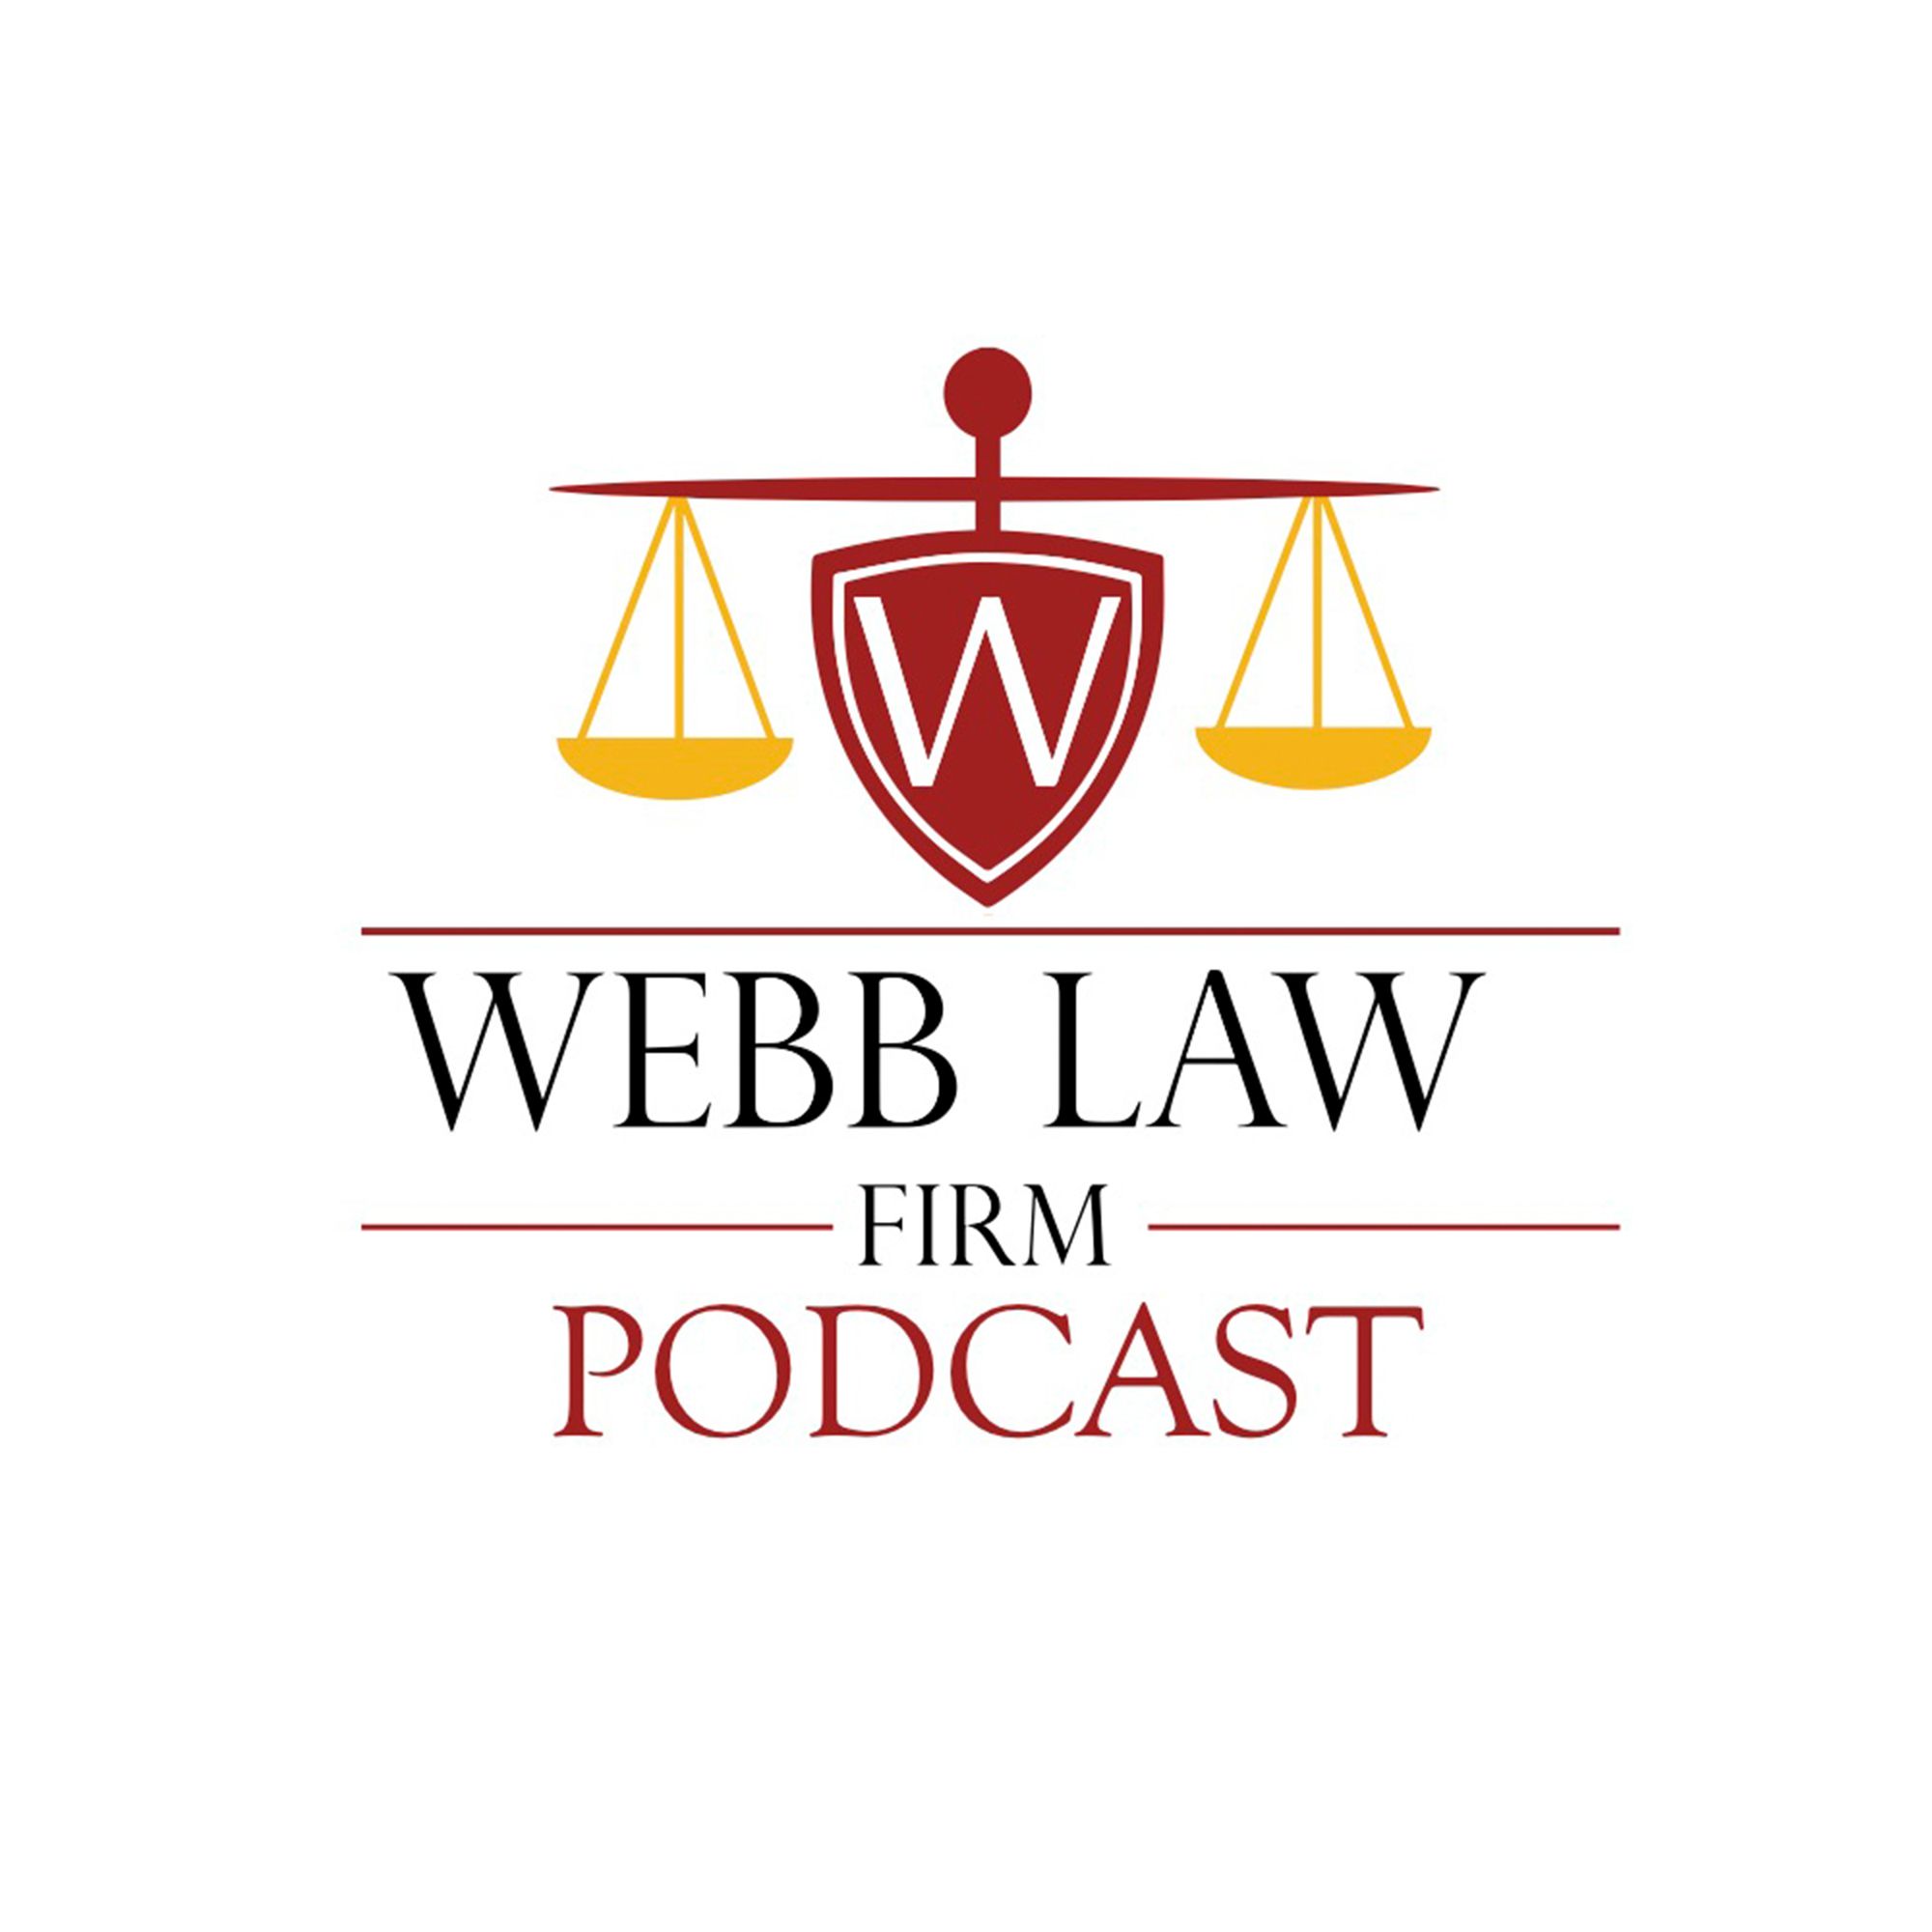 WEBB LAW FIRM PODCAST